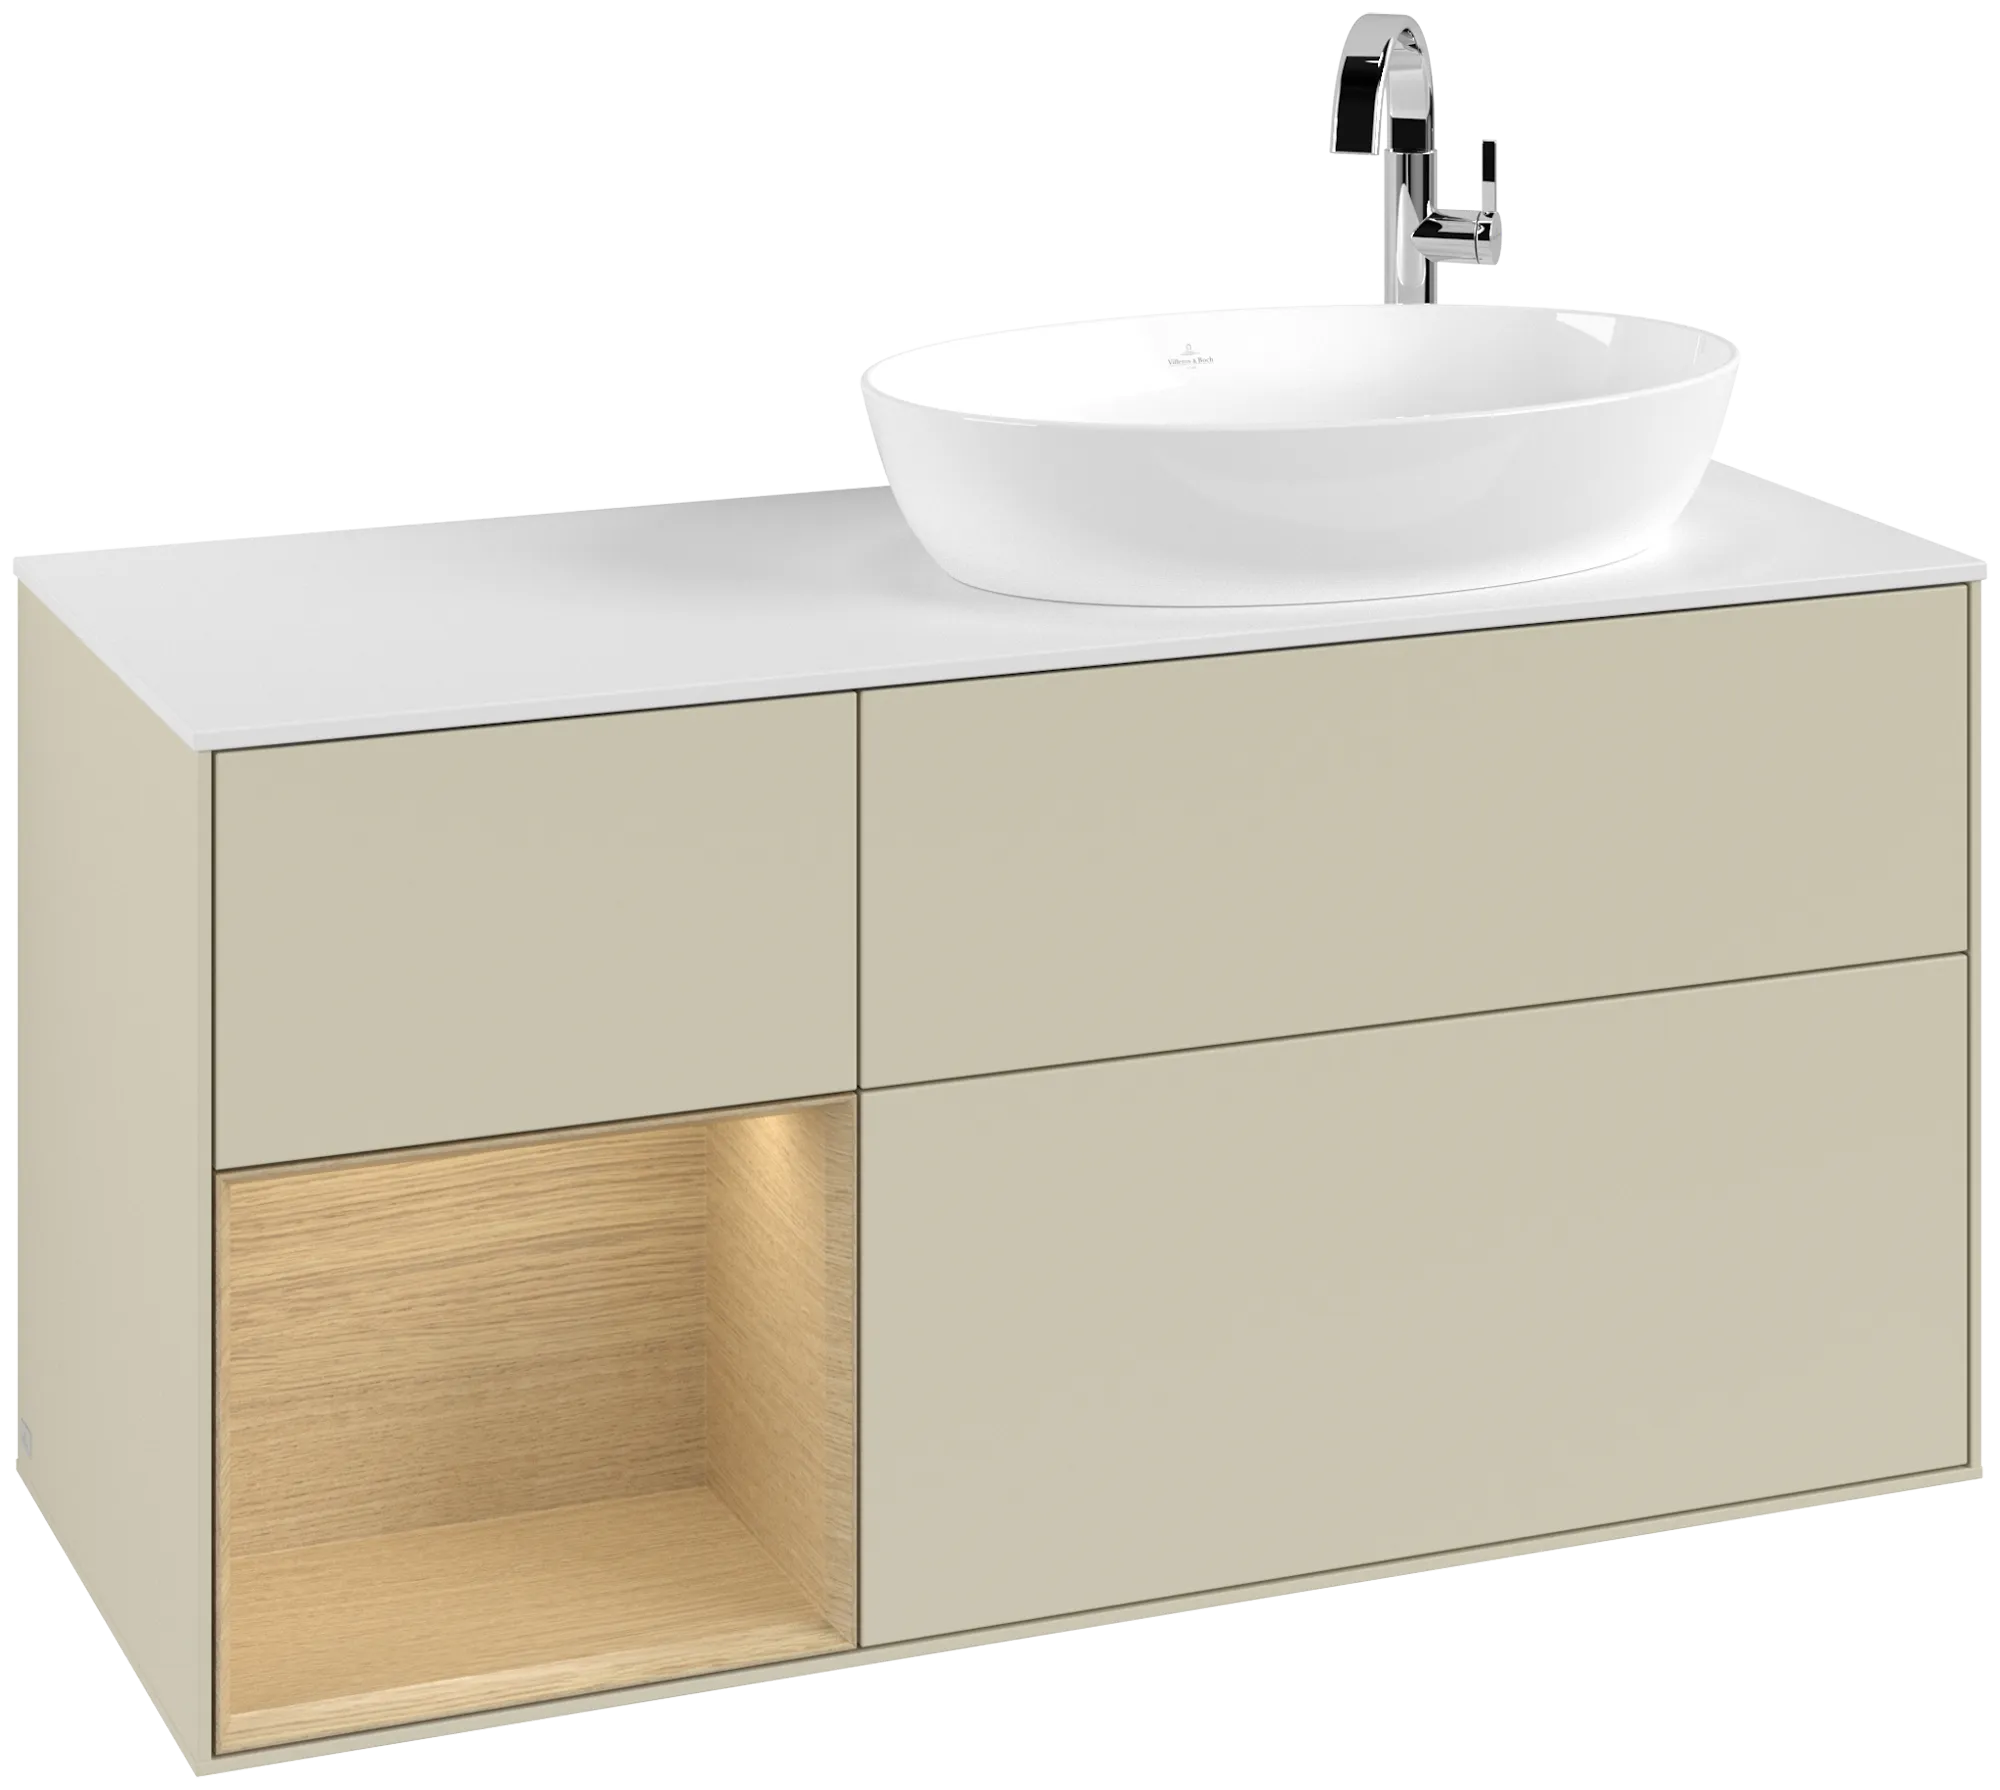 Picture of VILLEROY BOCH Finion Vanity unit, with lighting, 3 pull-out compartments, 1200 x 603 x 501 mm, Silk Grey Matt Lacquer / Oak Veneer / Glass White Matt #G921PCHJ